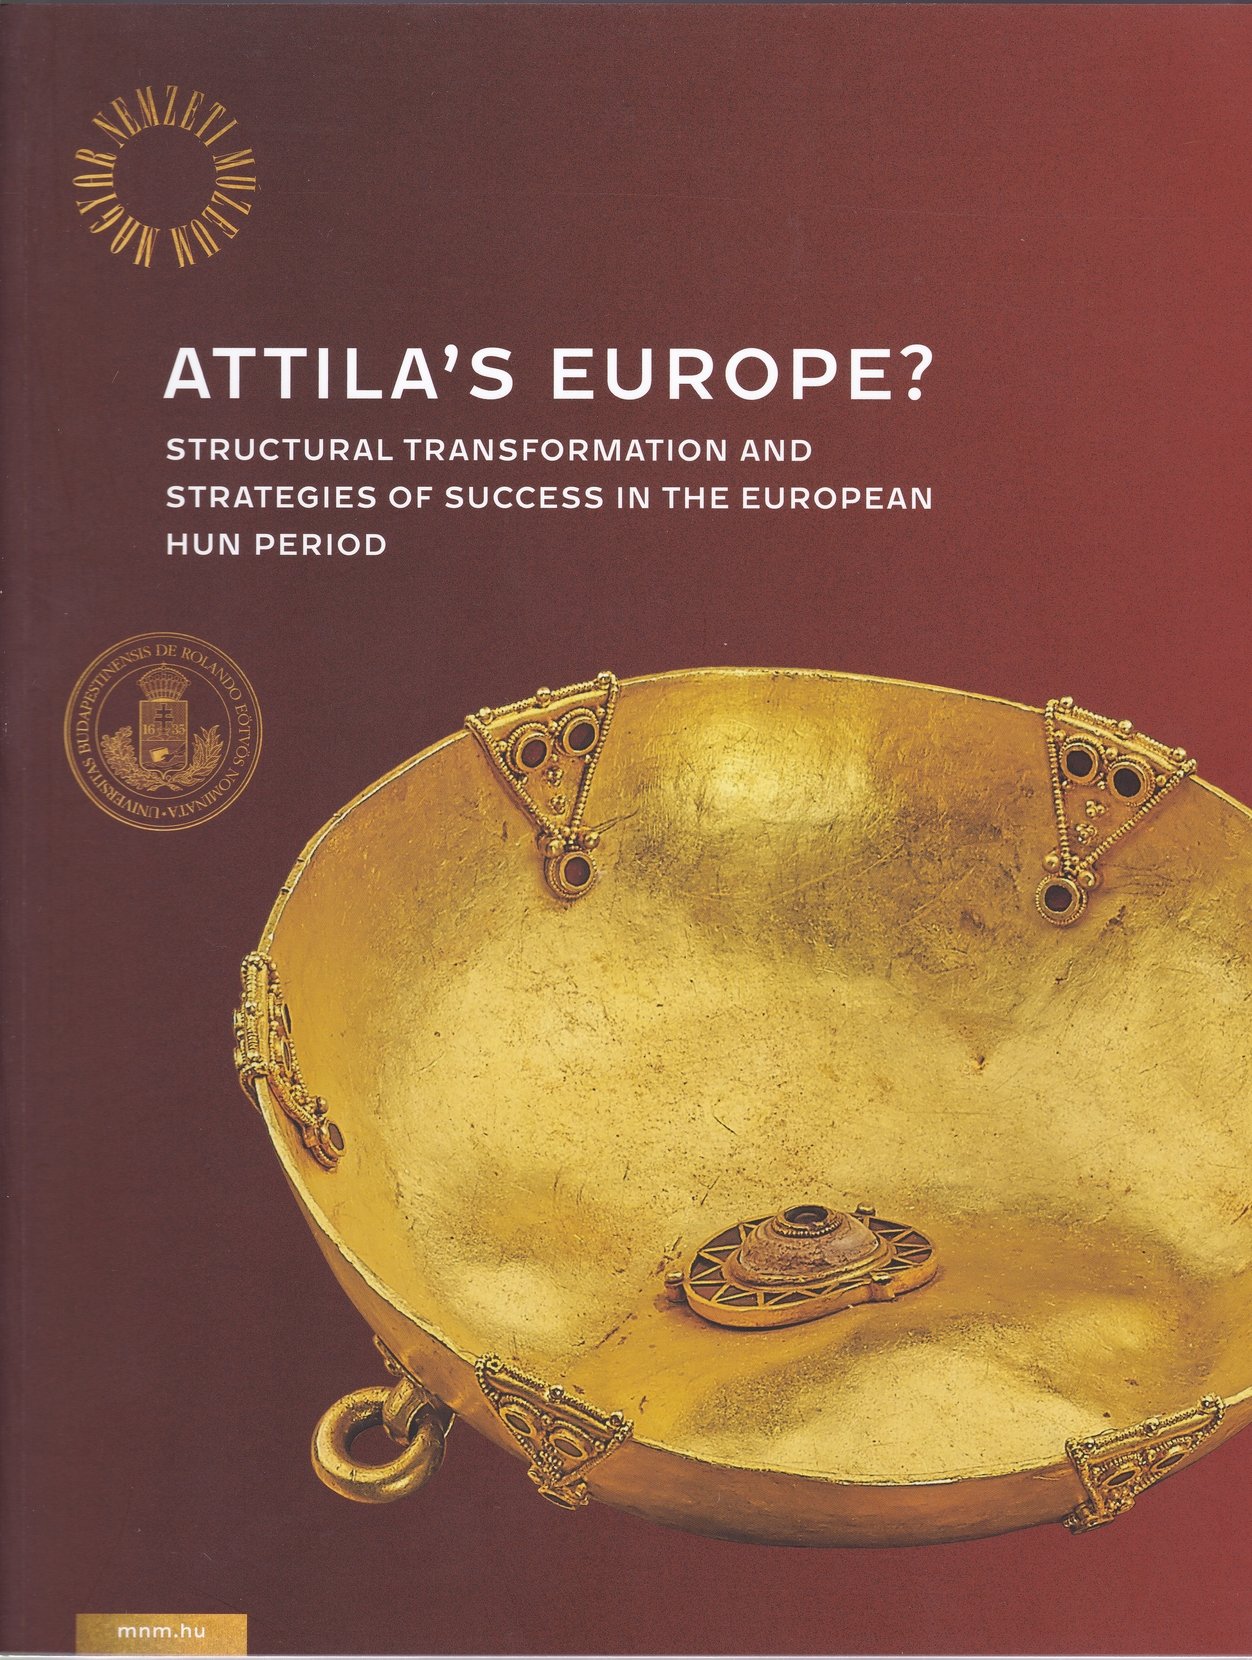 Attila's Europe? Structural transformation and strategies of success in the European Hun period (Rippl-Rónai Múzeum CC BY-NC-ND)